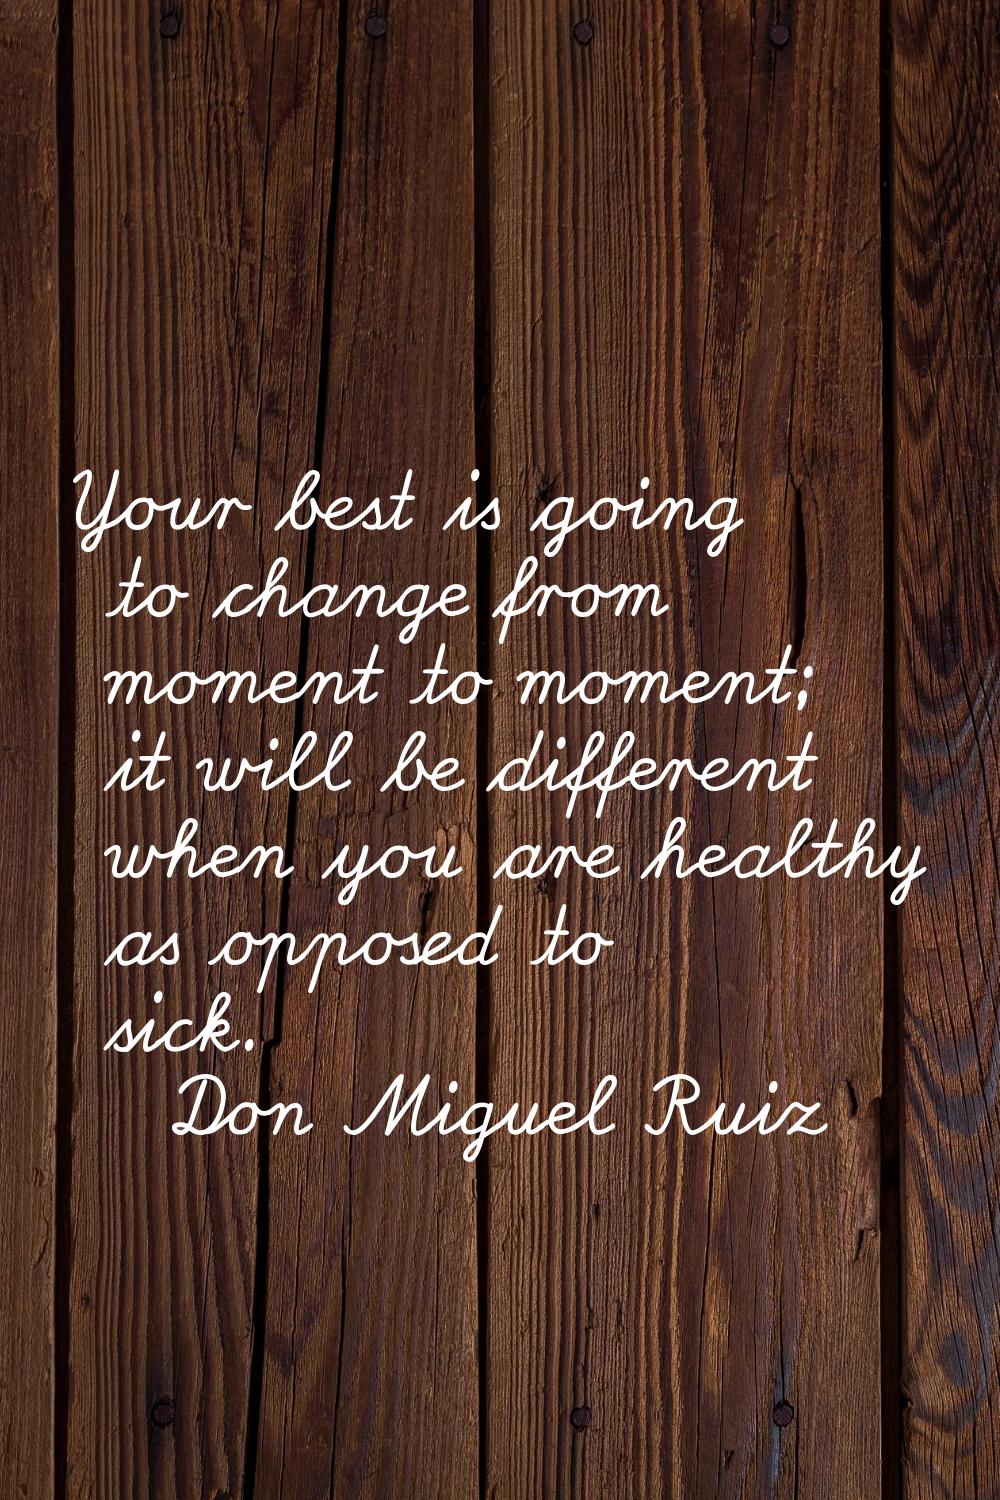 Your best is going to change from moment to moment; it will be different when you are healthy as op